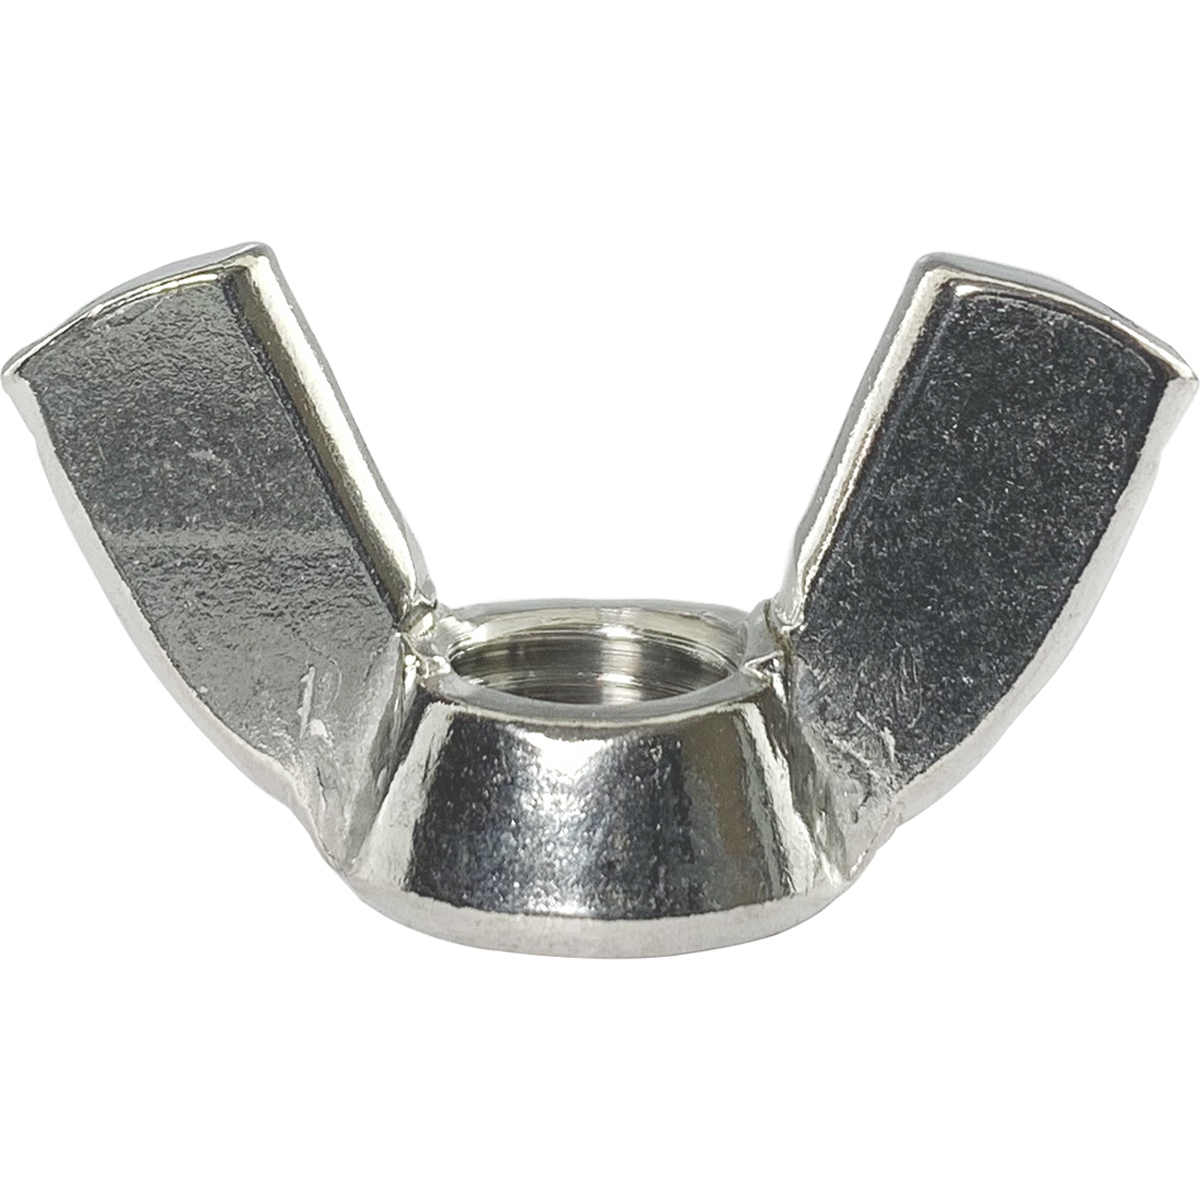 Wing nuts, also known as a wingnut or butterfly nuts are available in a variety of diameters and materials